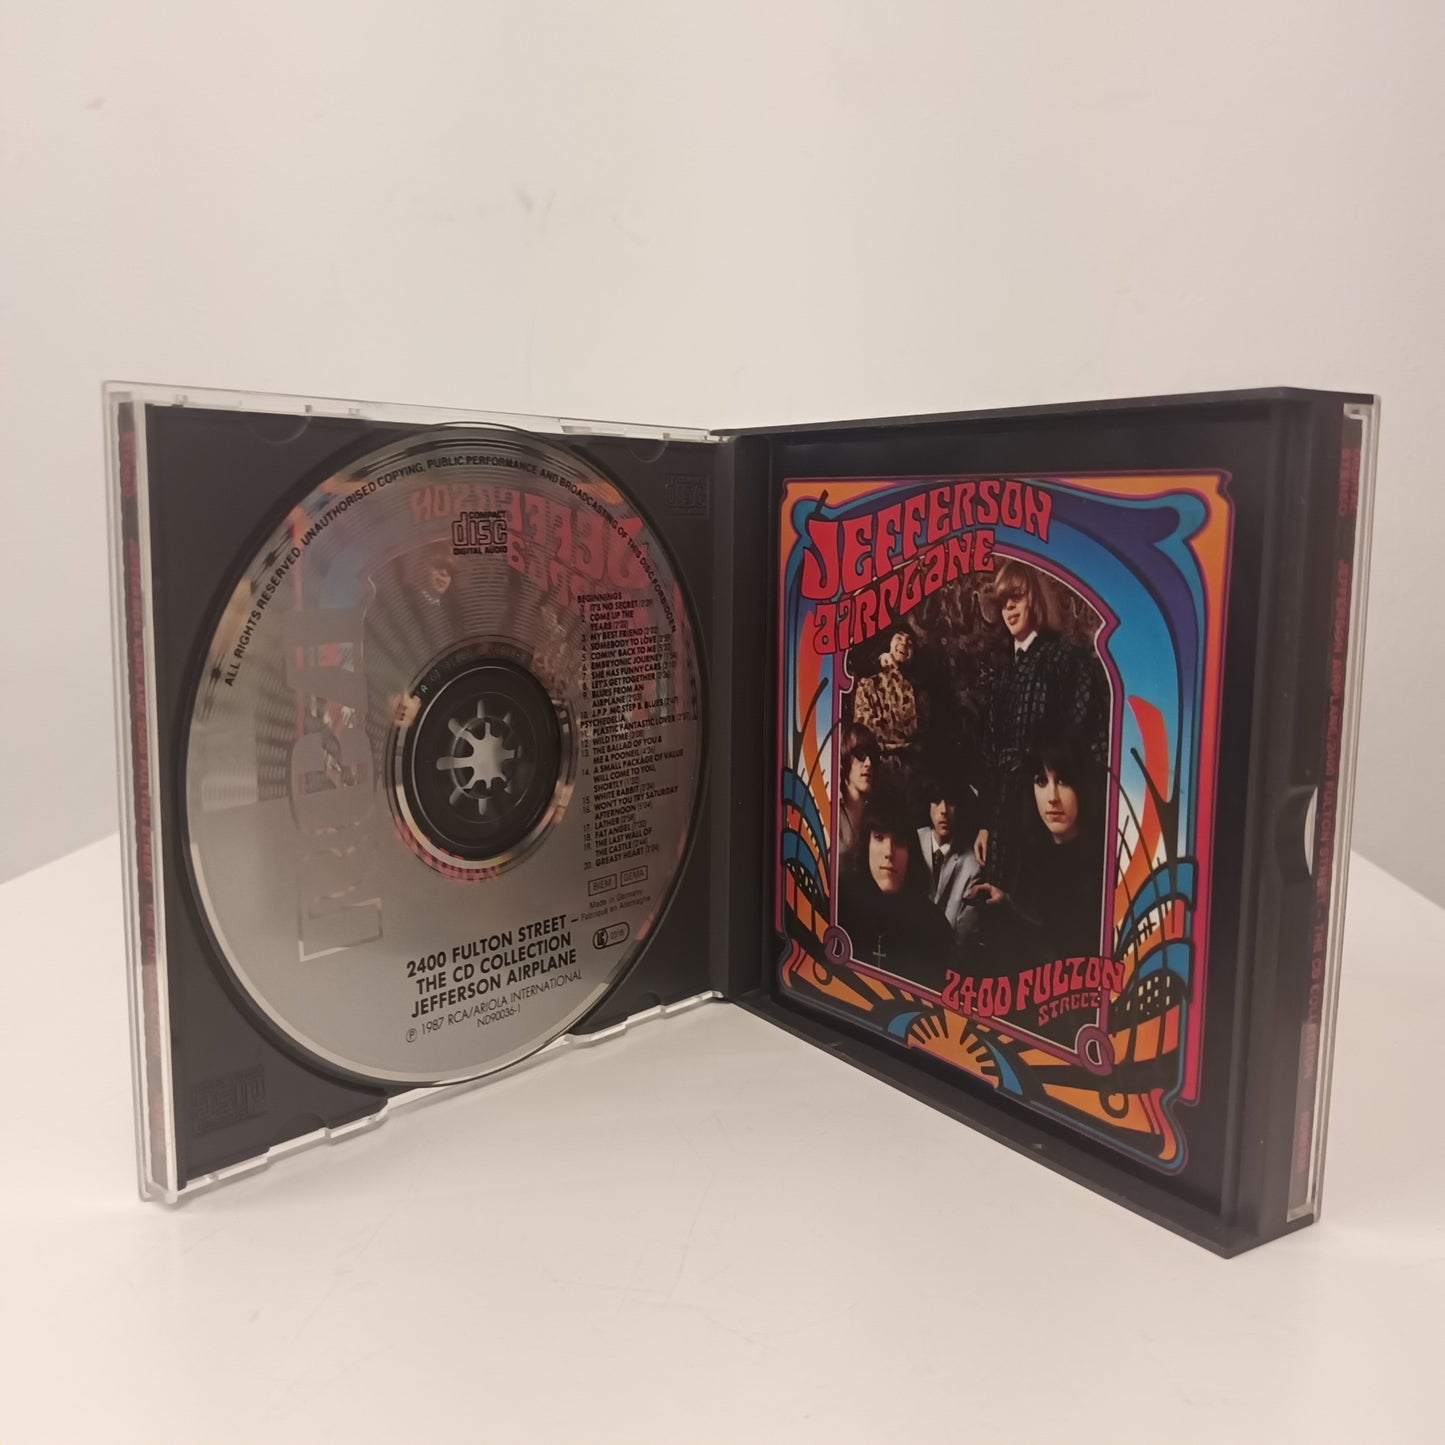 Jefferson Airplane 2400 Fulton Street The CD Collection